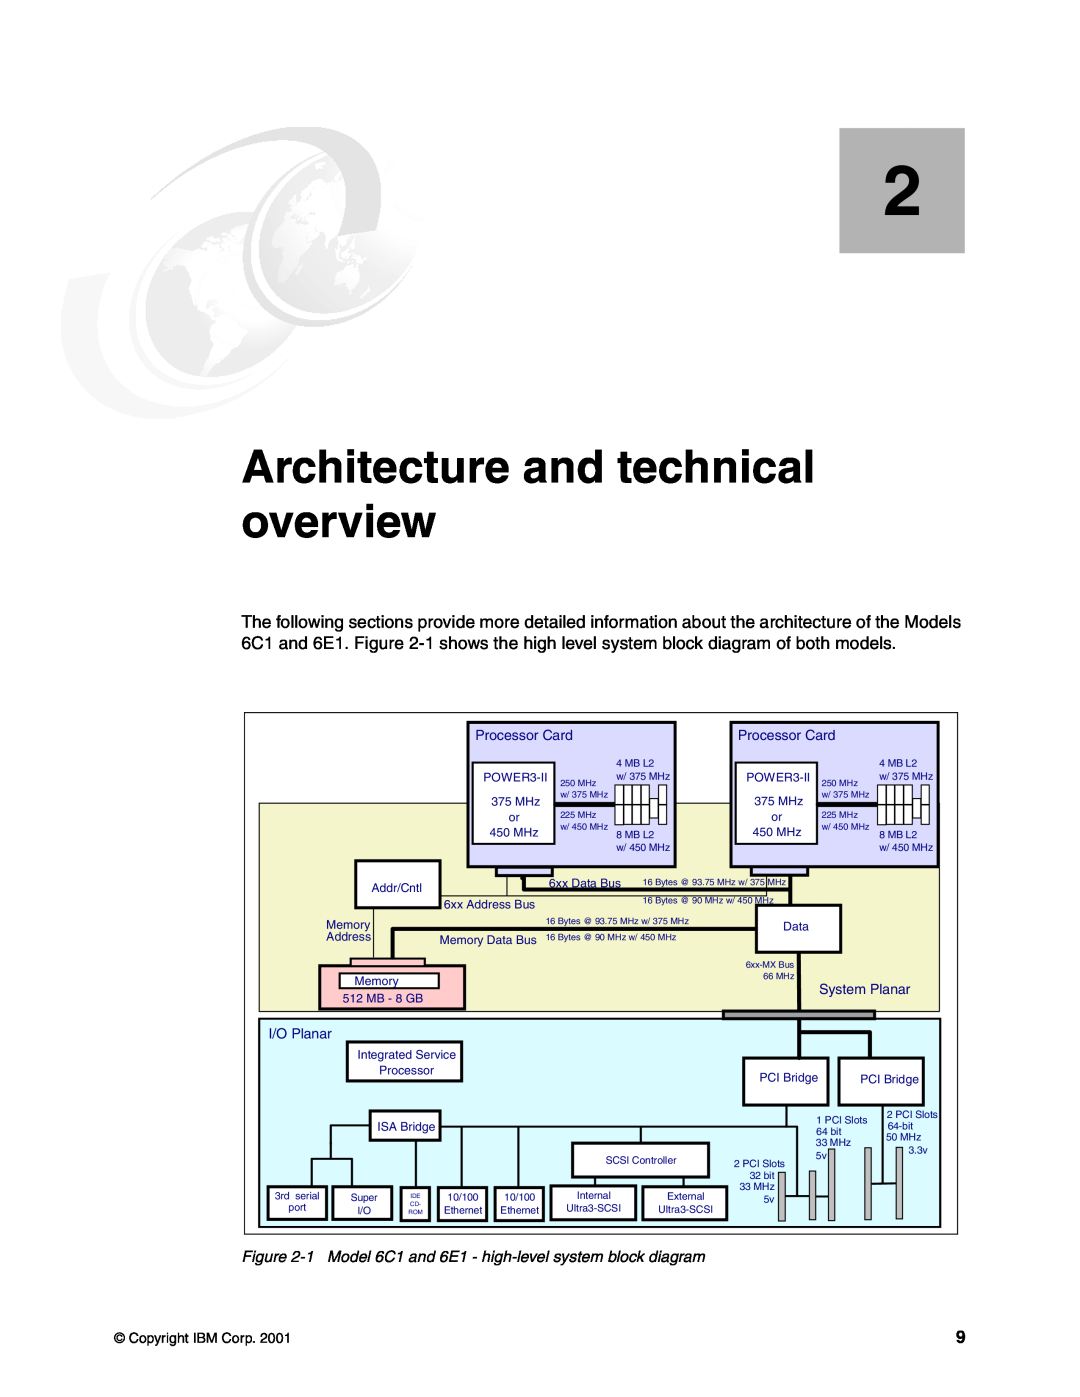 IBM 610 manual Architecture and technical overview, 1 Model 6C1 and 6E1 - high-level system block diagram, Processor Card 